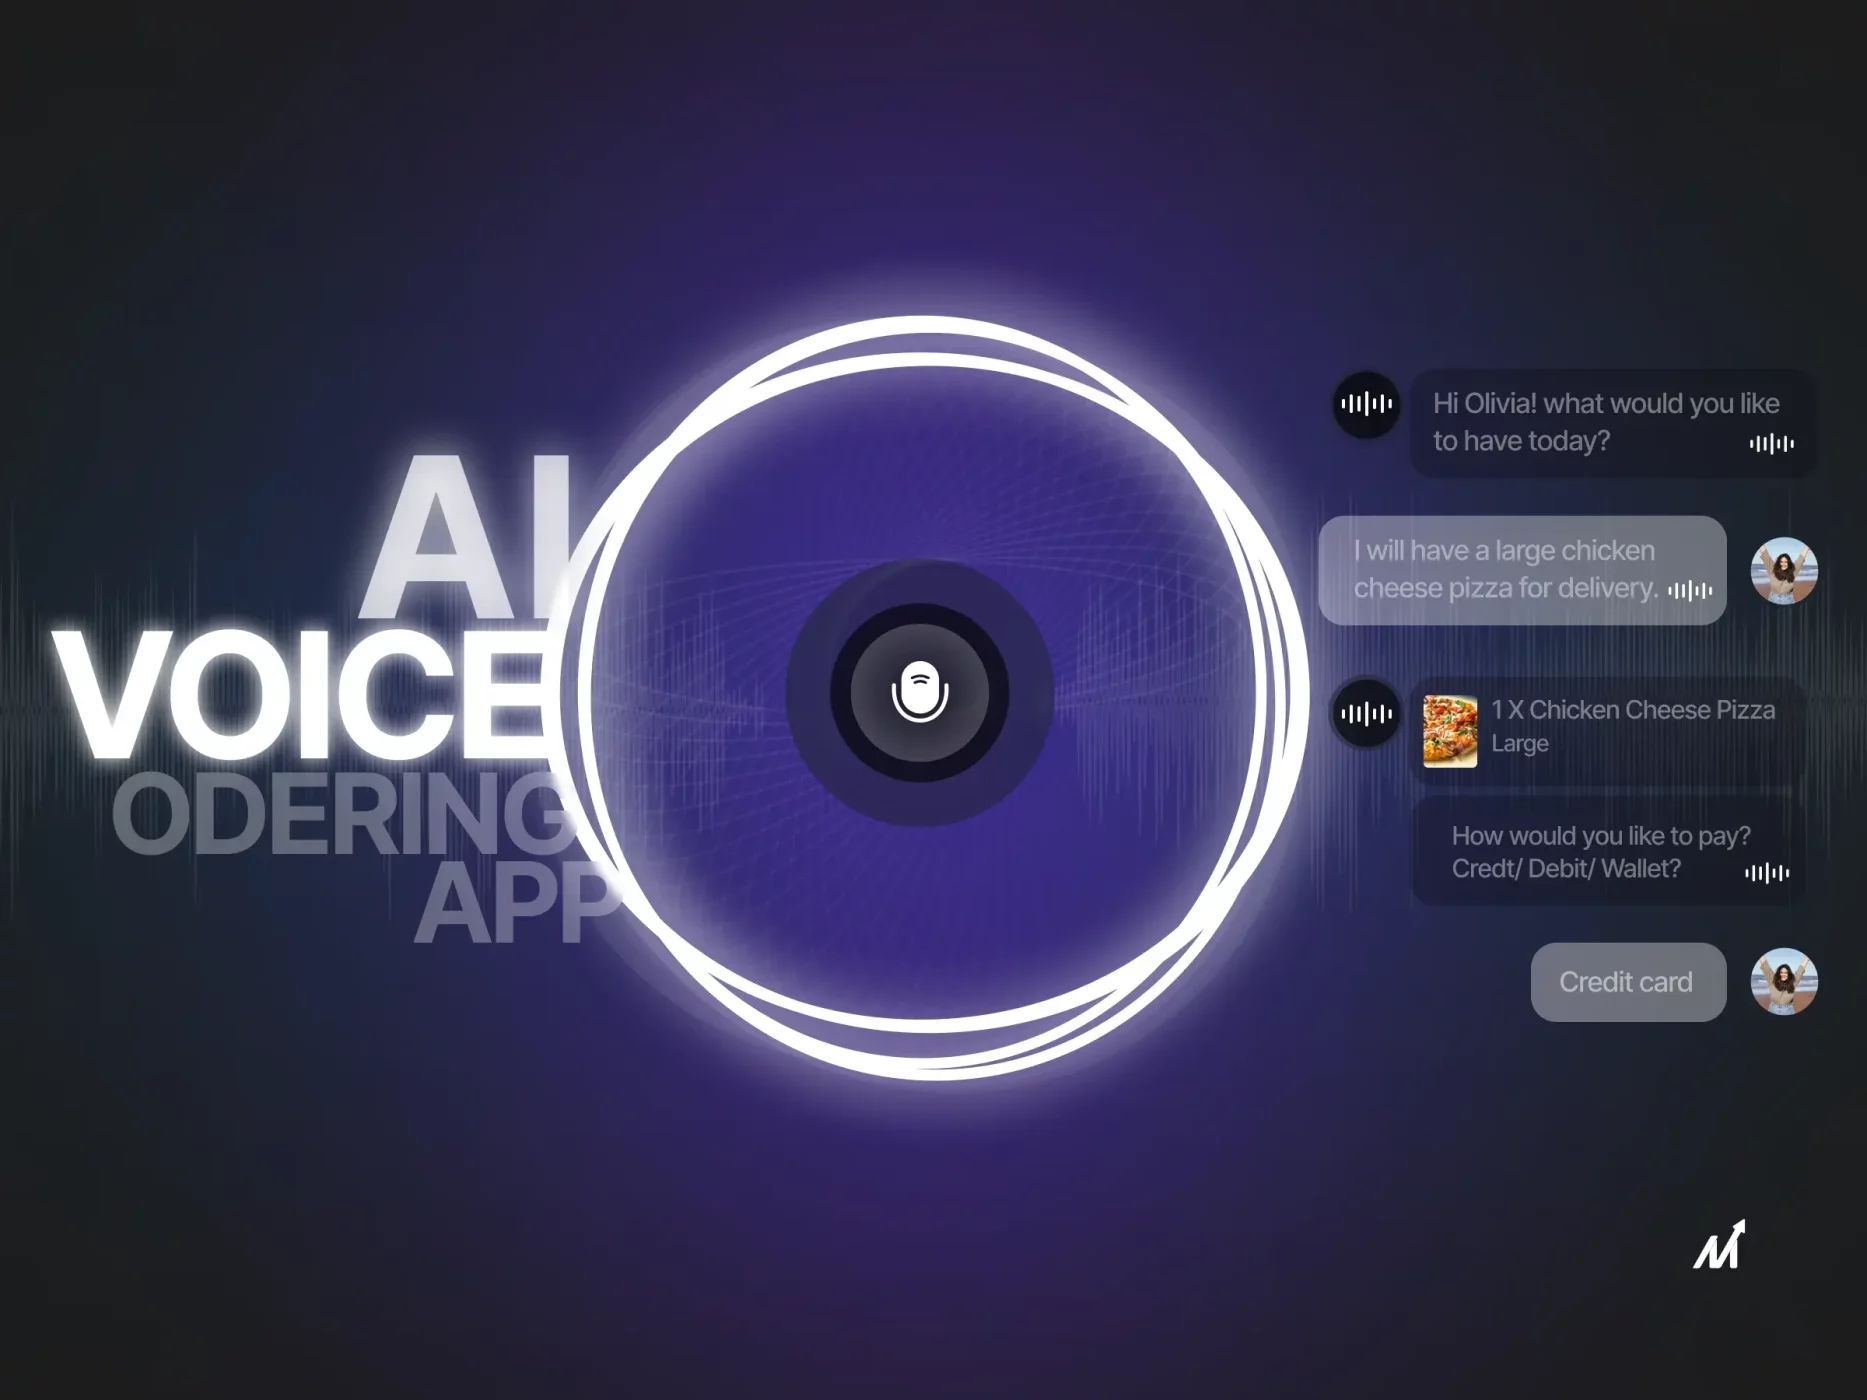 How to Build an AI Voice Ordering System?